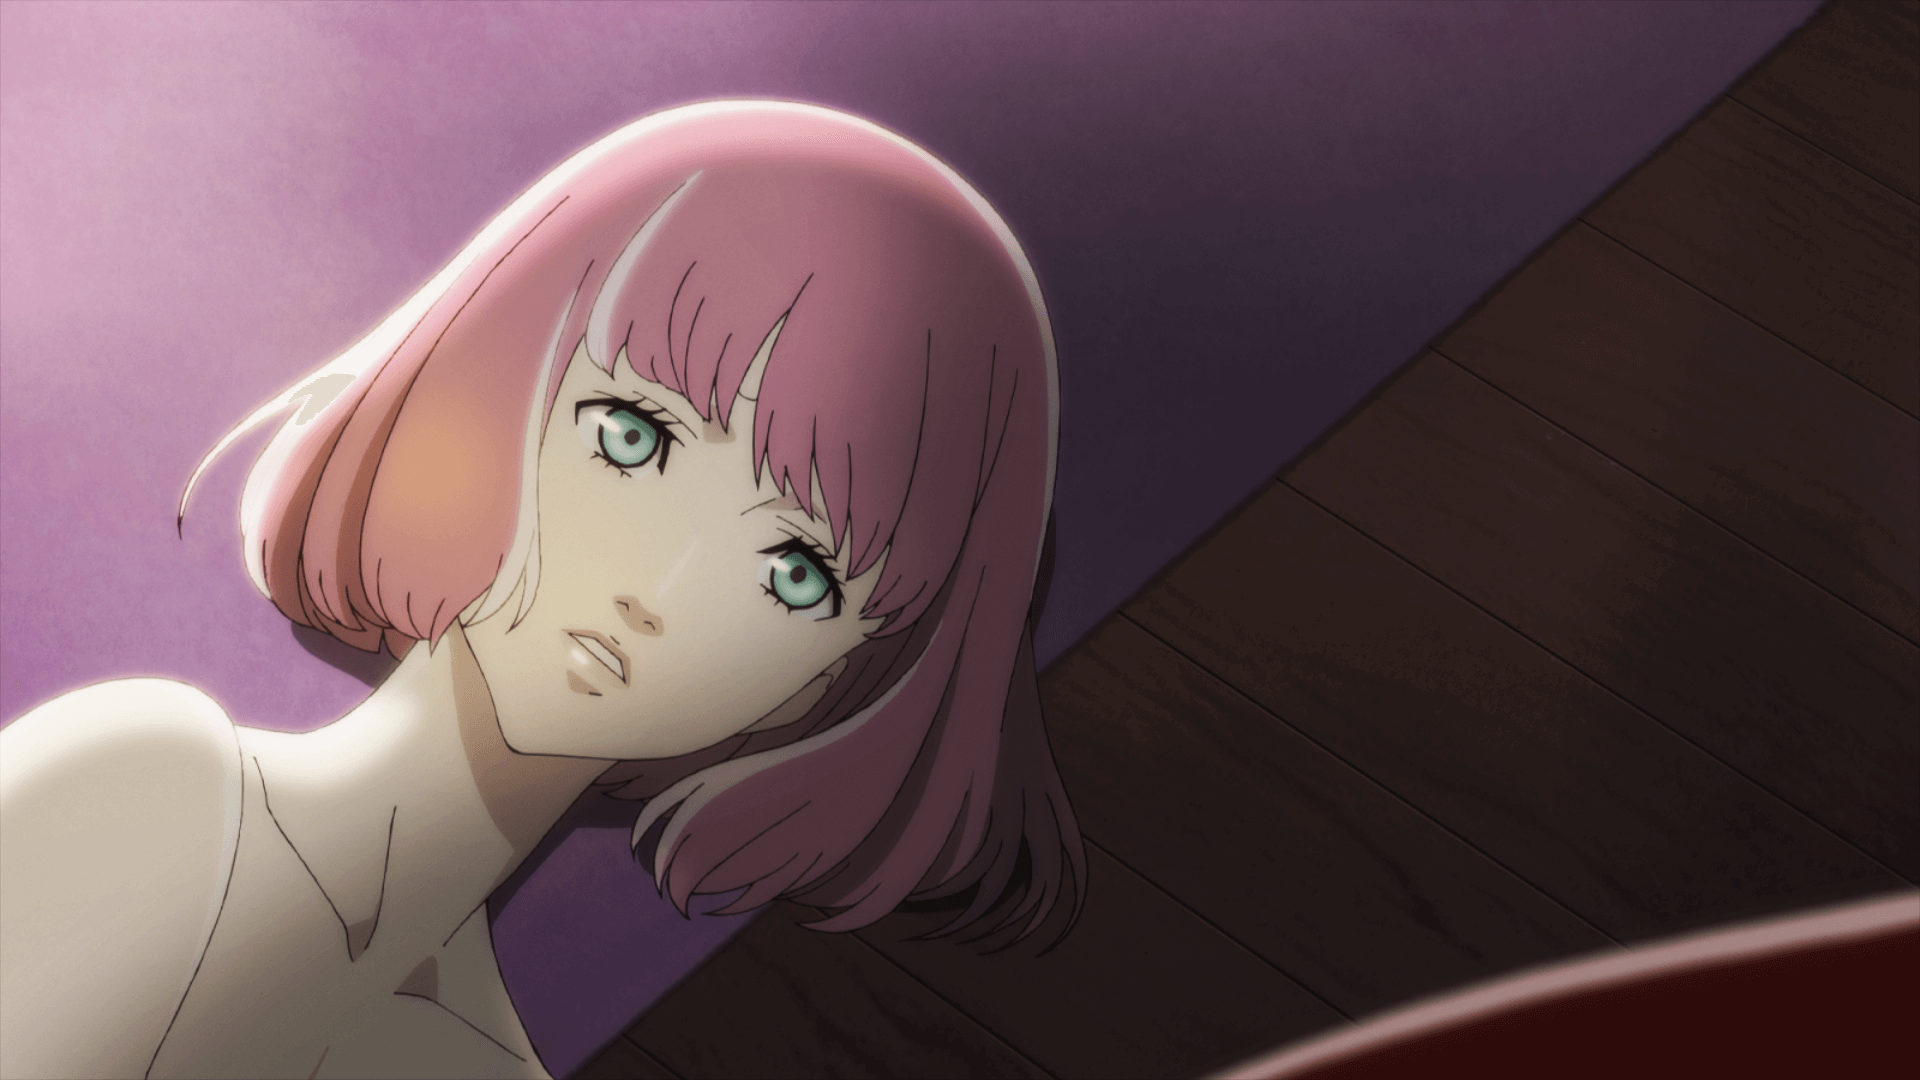 Meet new romance Rin in Catherine Full Body's first trailer 